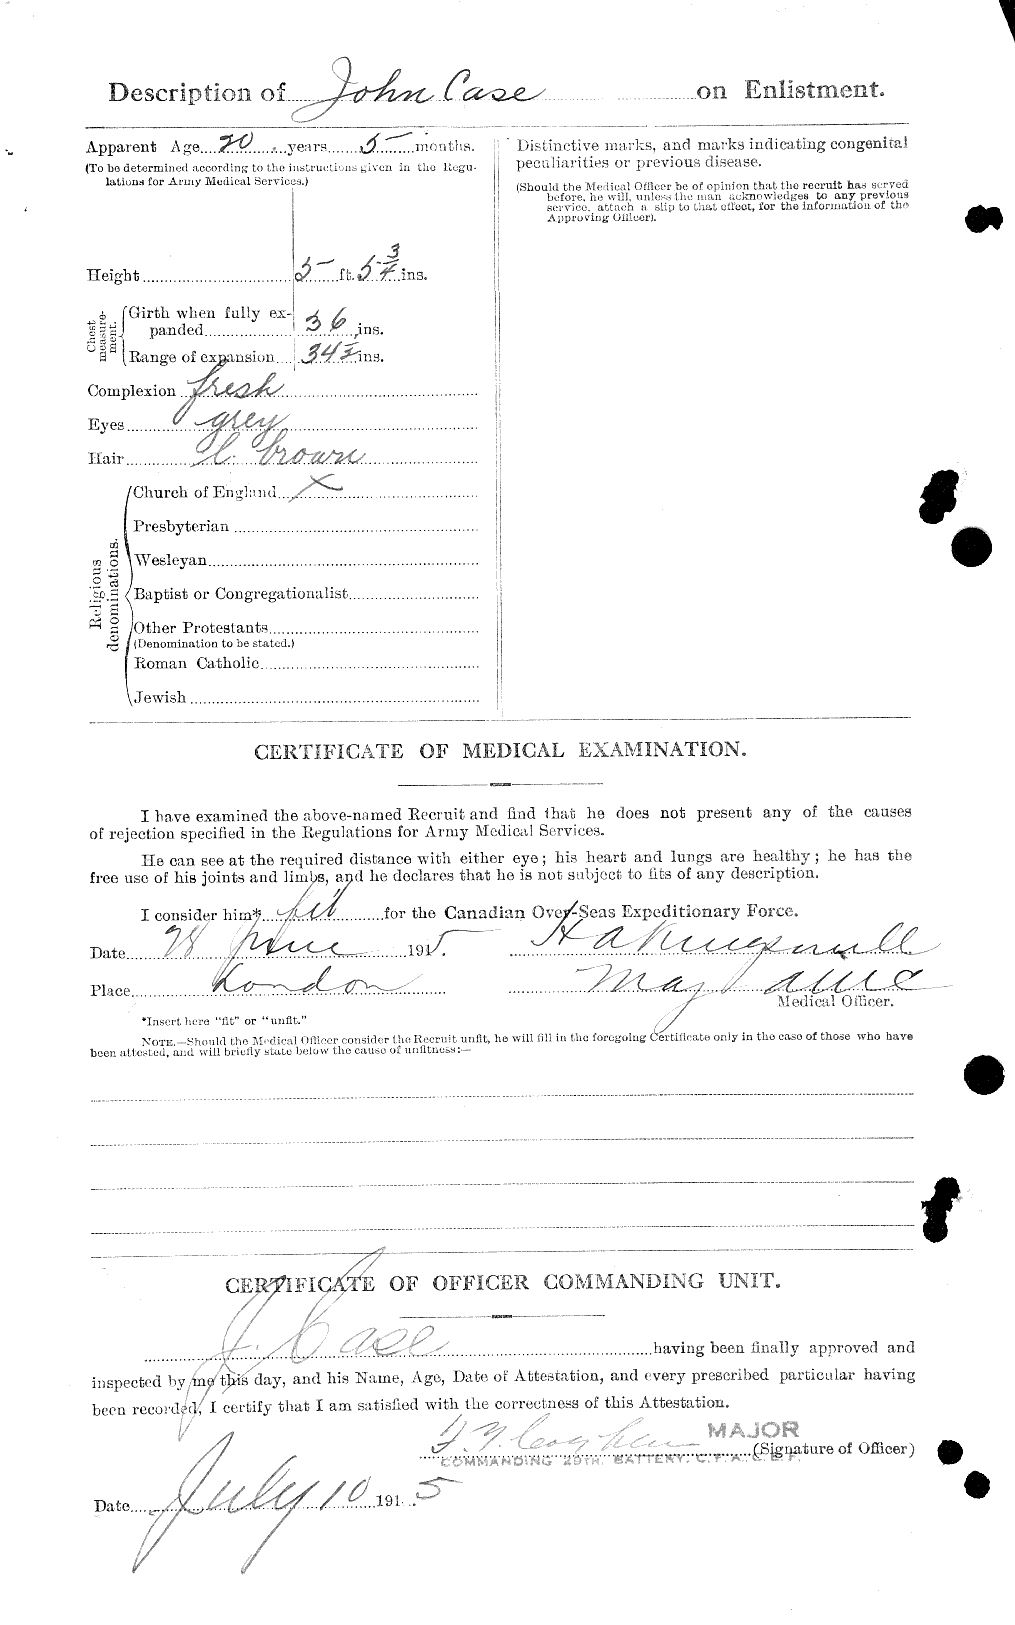 Personnel Records of the First World War - CEF 012716b